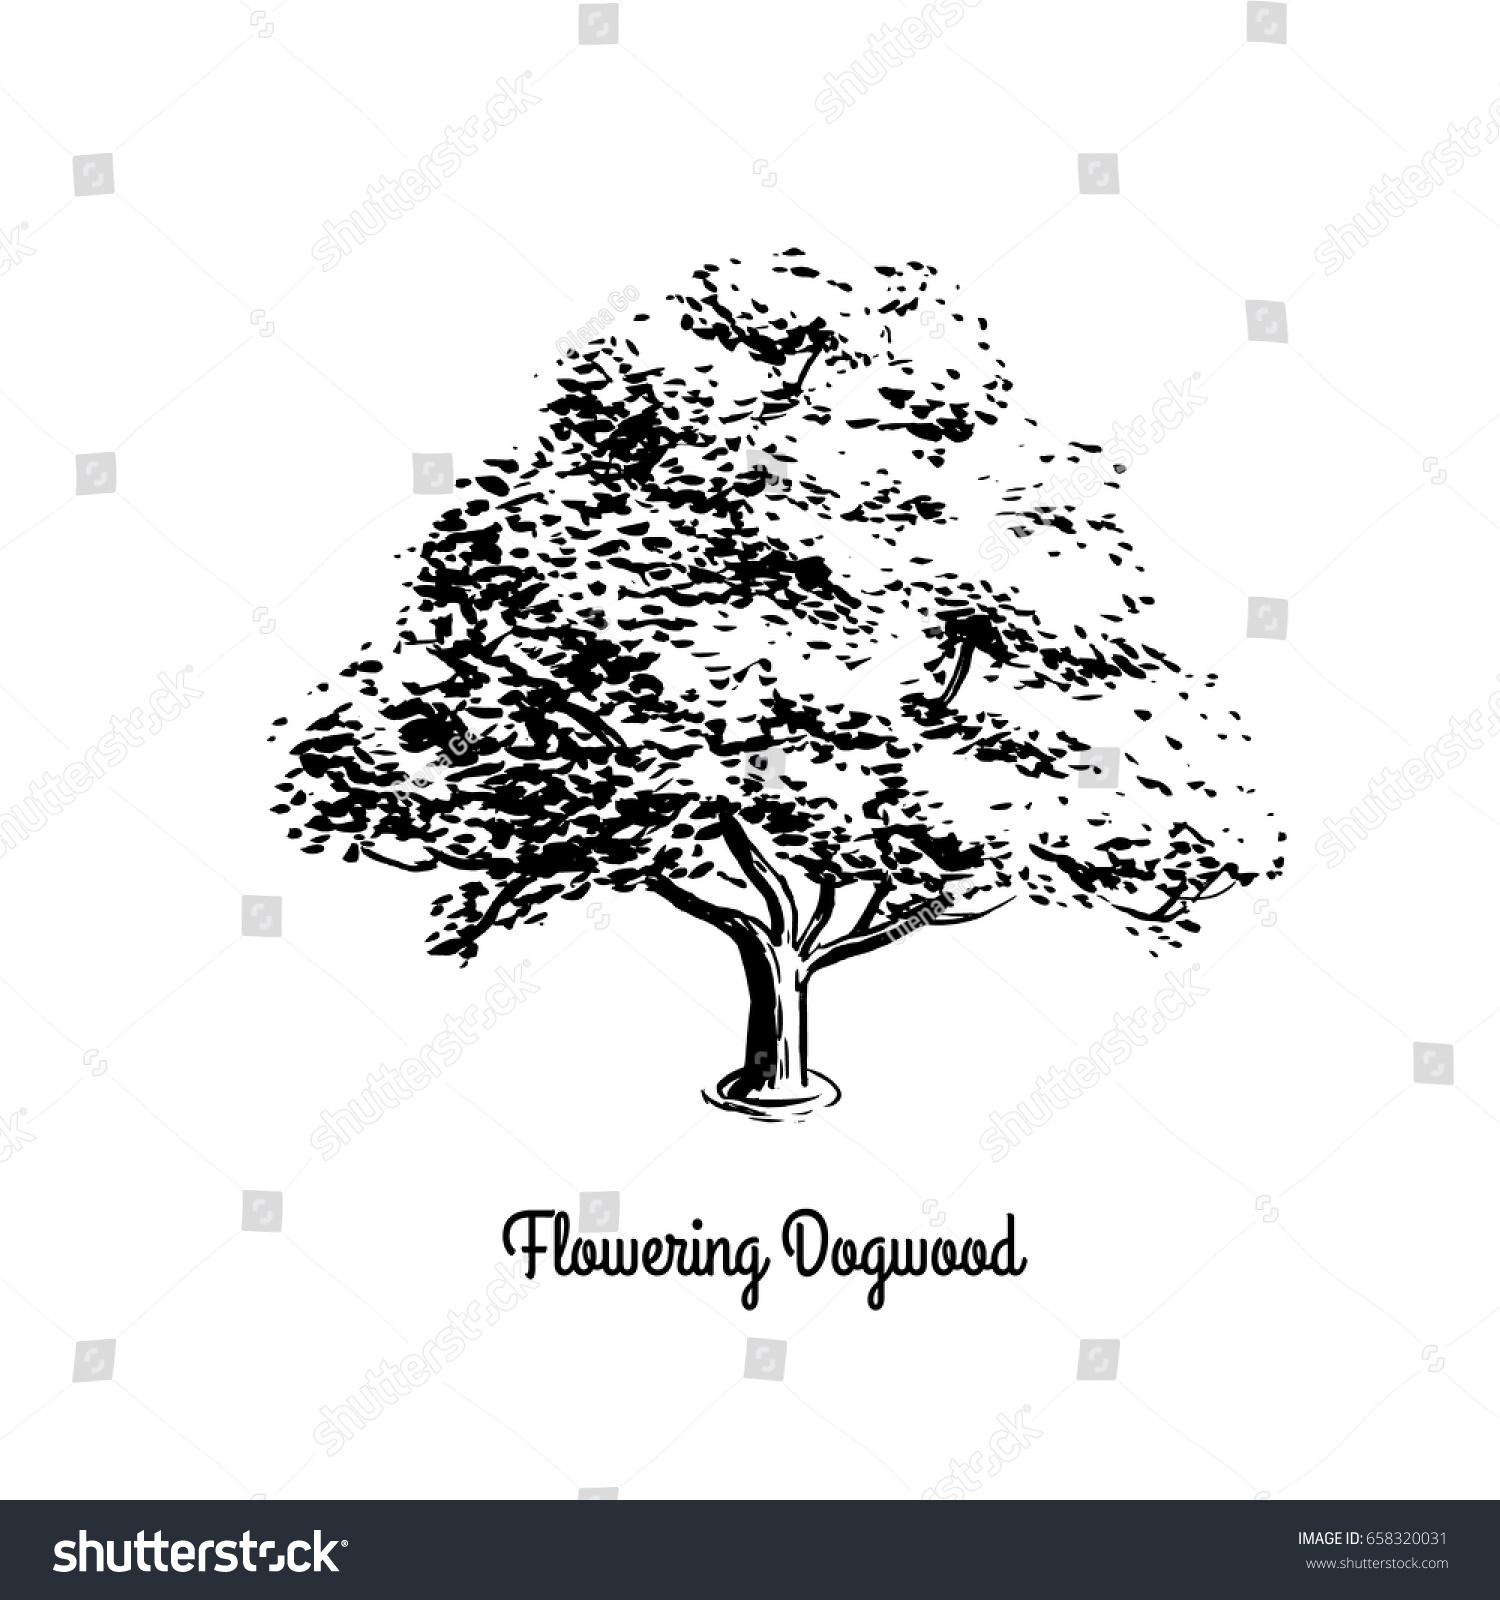 SVG of Vector sketch illustration of Flowering Dogwood. Black silhouette of tree isolated on white background. Official state tree of Missouri and Virginia. svg